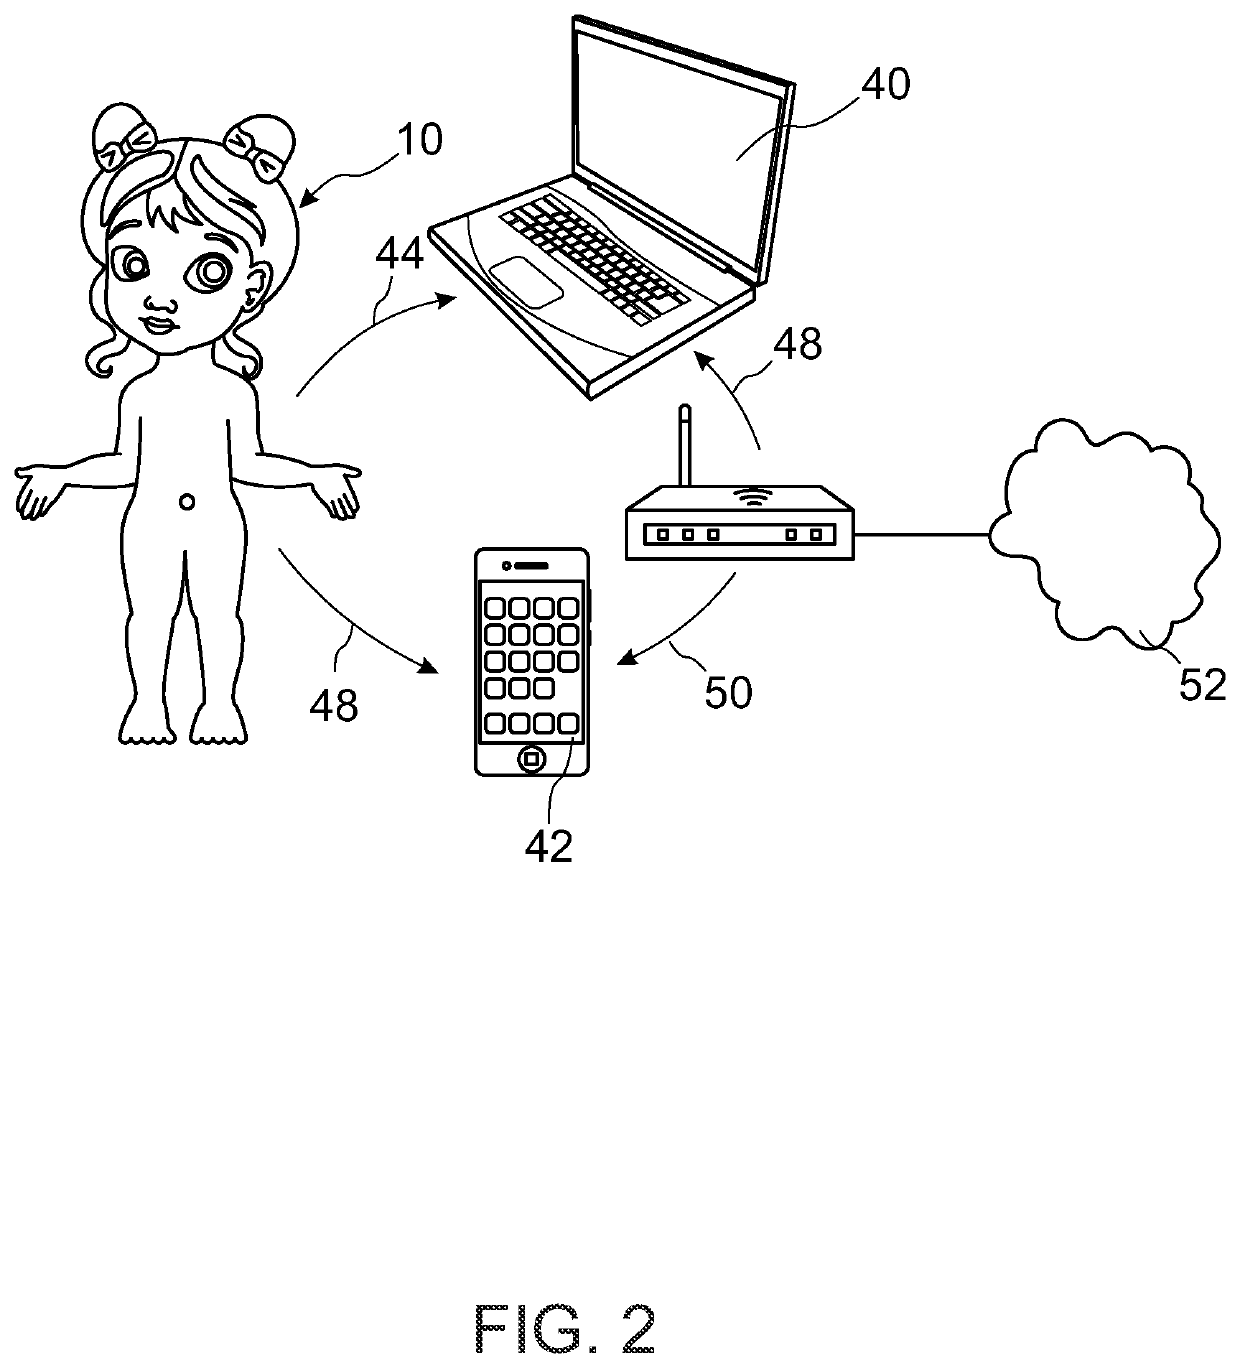 Hygiene doll apparatus and system and methods for practicing hygiene thereof